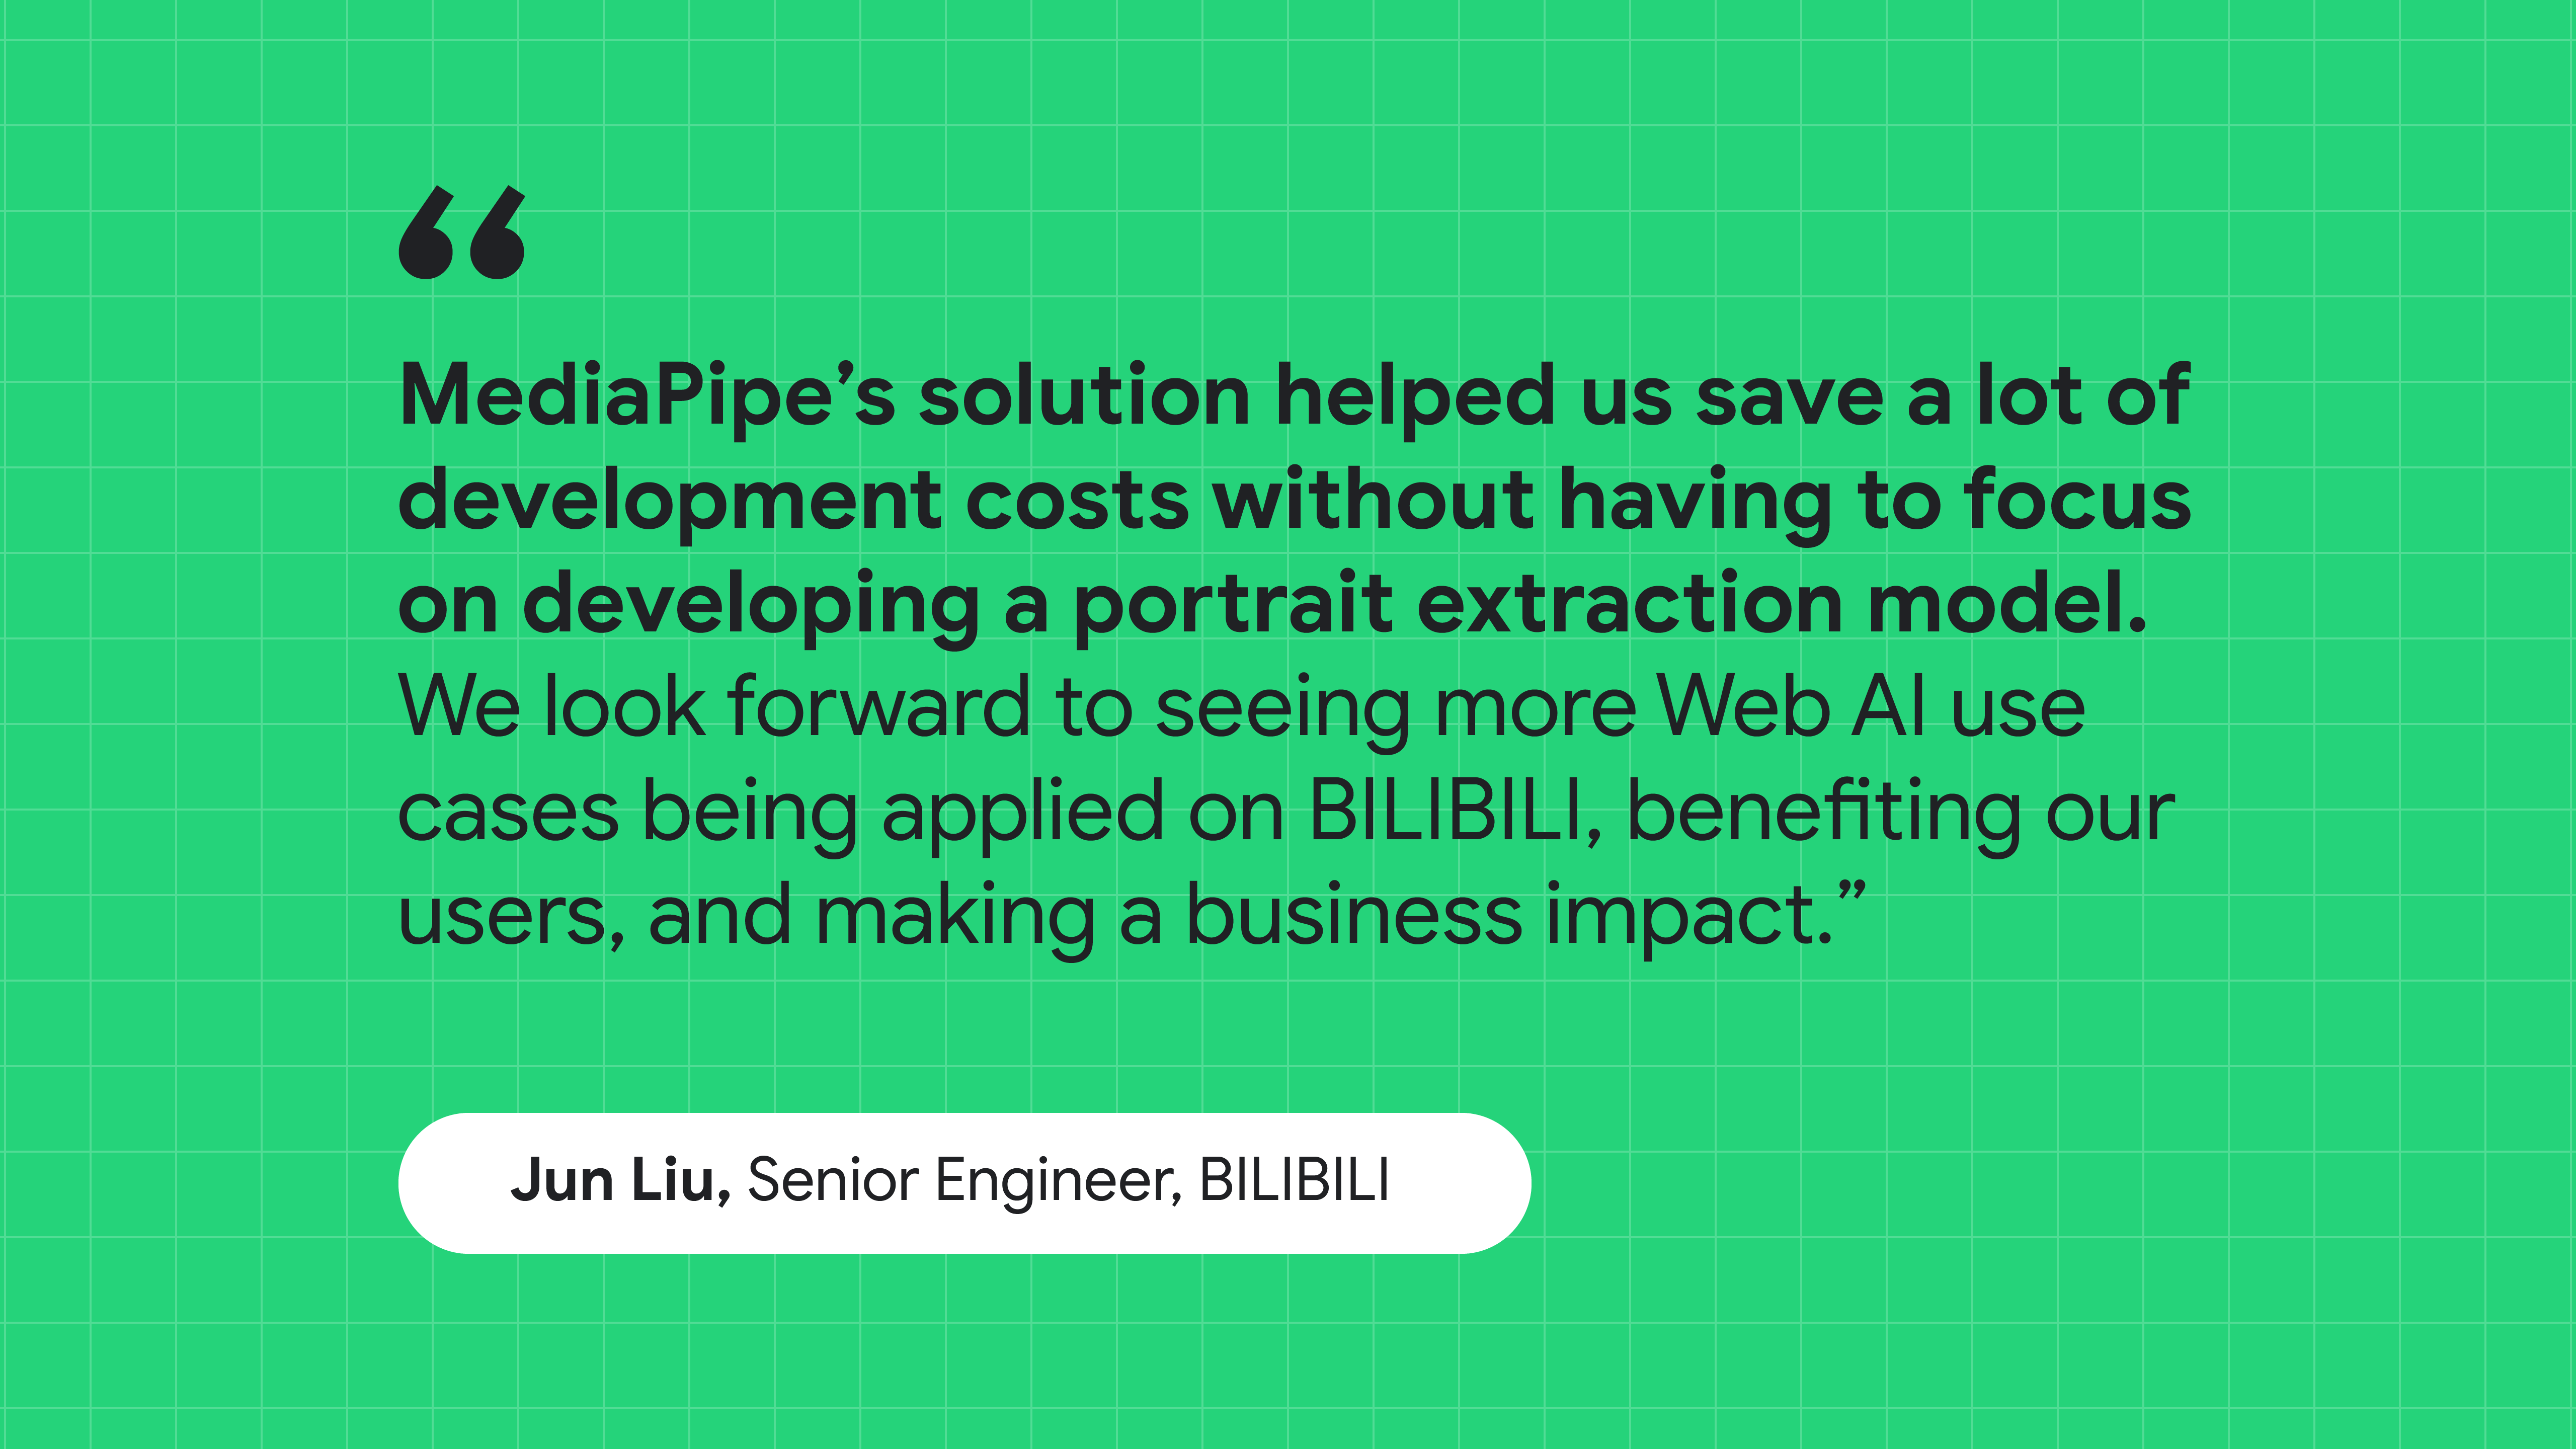 Quote from Jun Liu, senior engineer at BILIBILI: MediaPipe's solution helped save us development costs without focusing on creating a portrait extraction model.